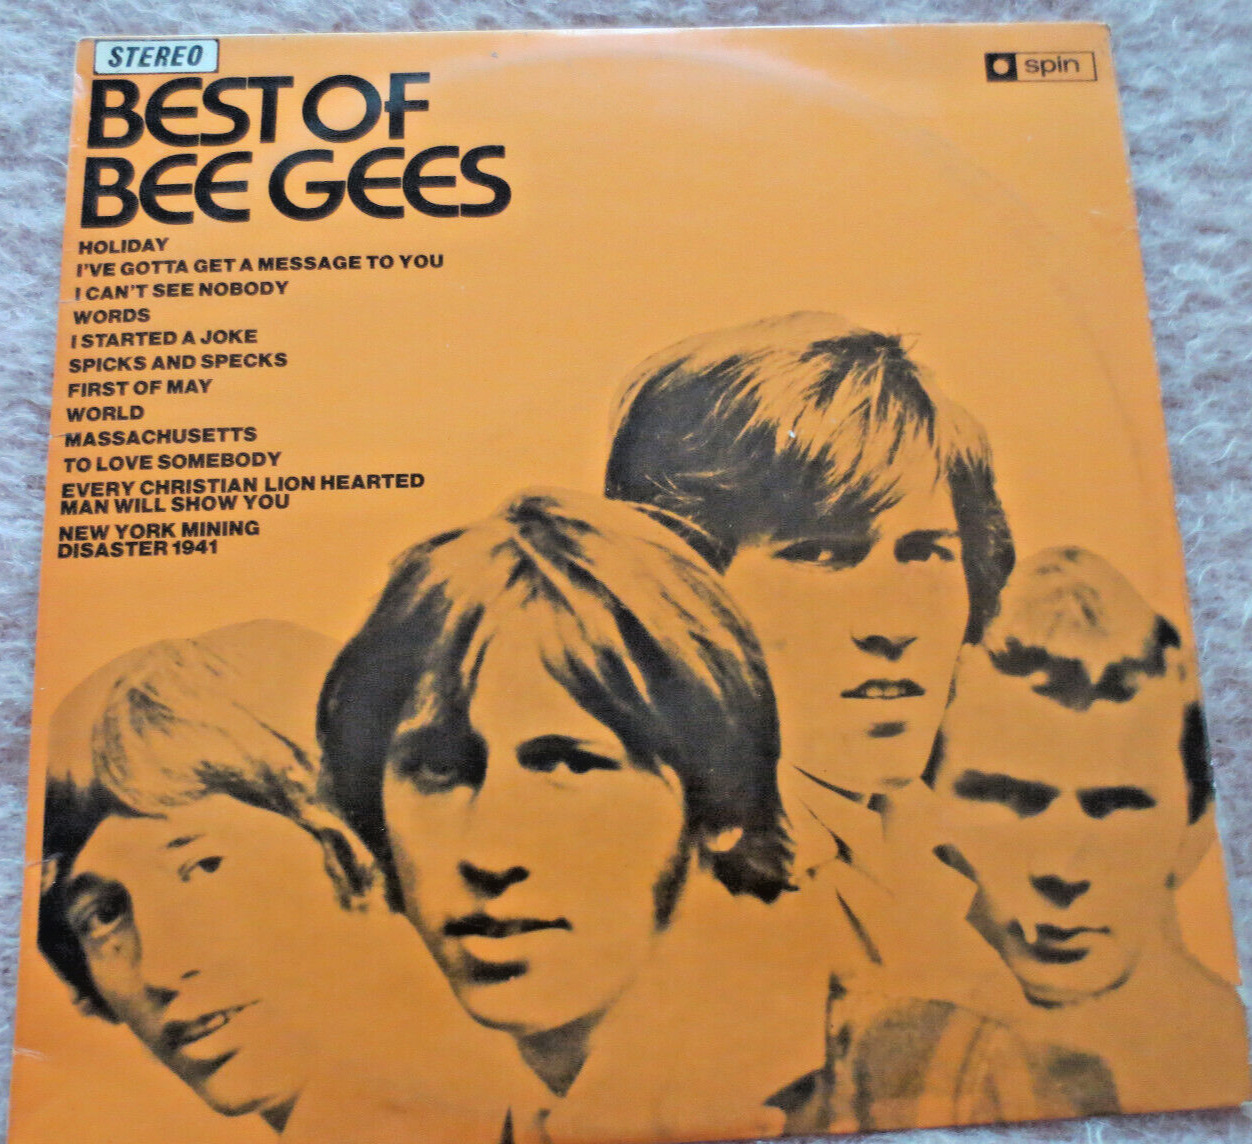 GENUINE VINTAGE LP RECORD 197O\'S SPIN - BEST OF THE BEE GEES